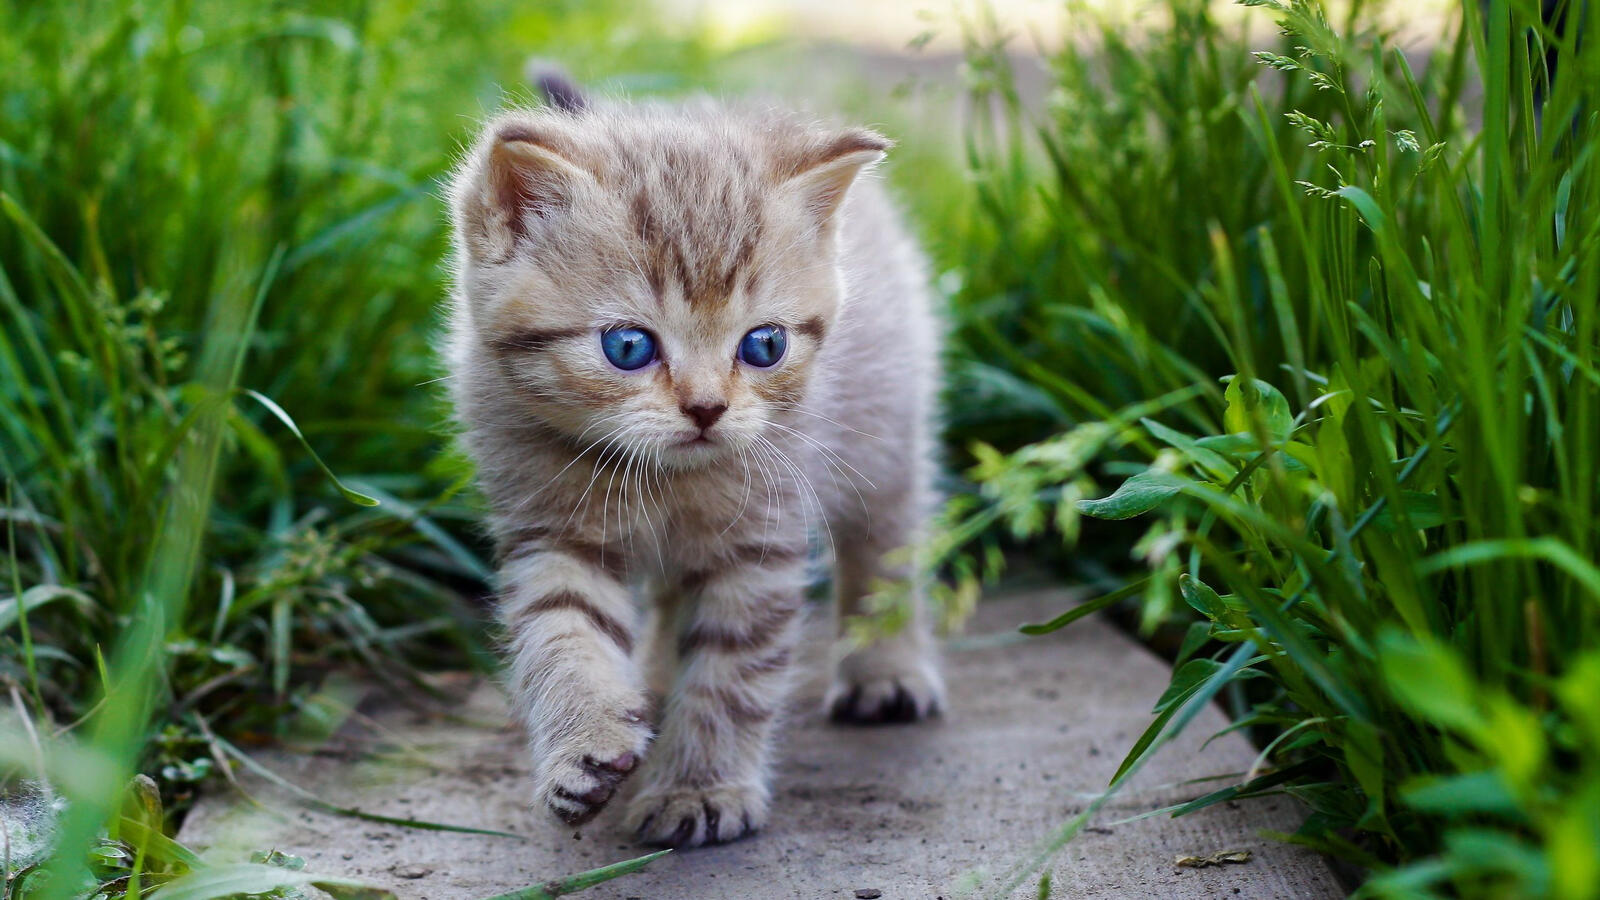 Free photo A kitten with blue eyes on a walk.